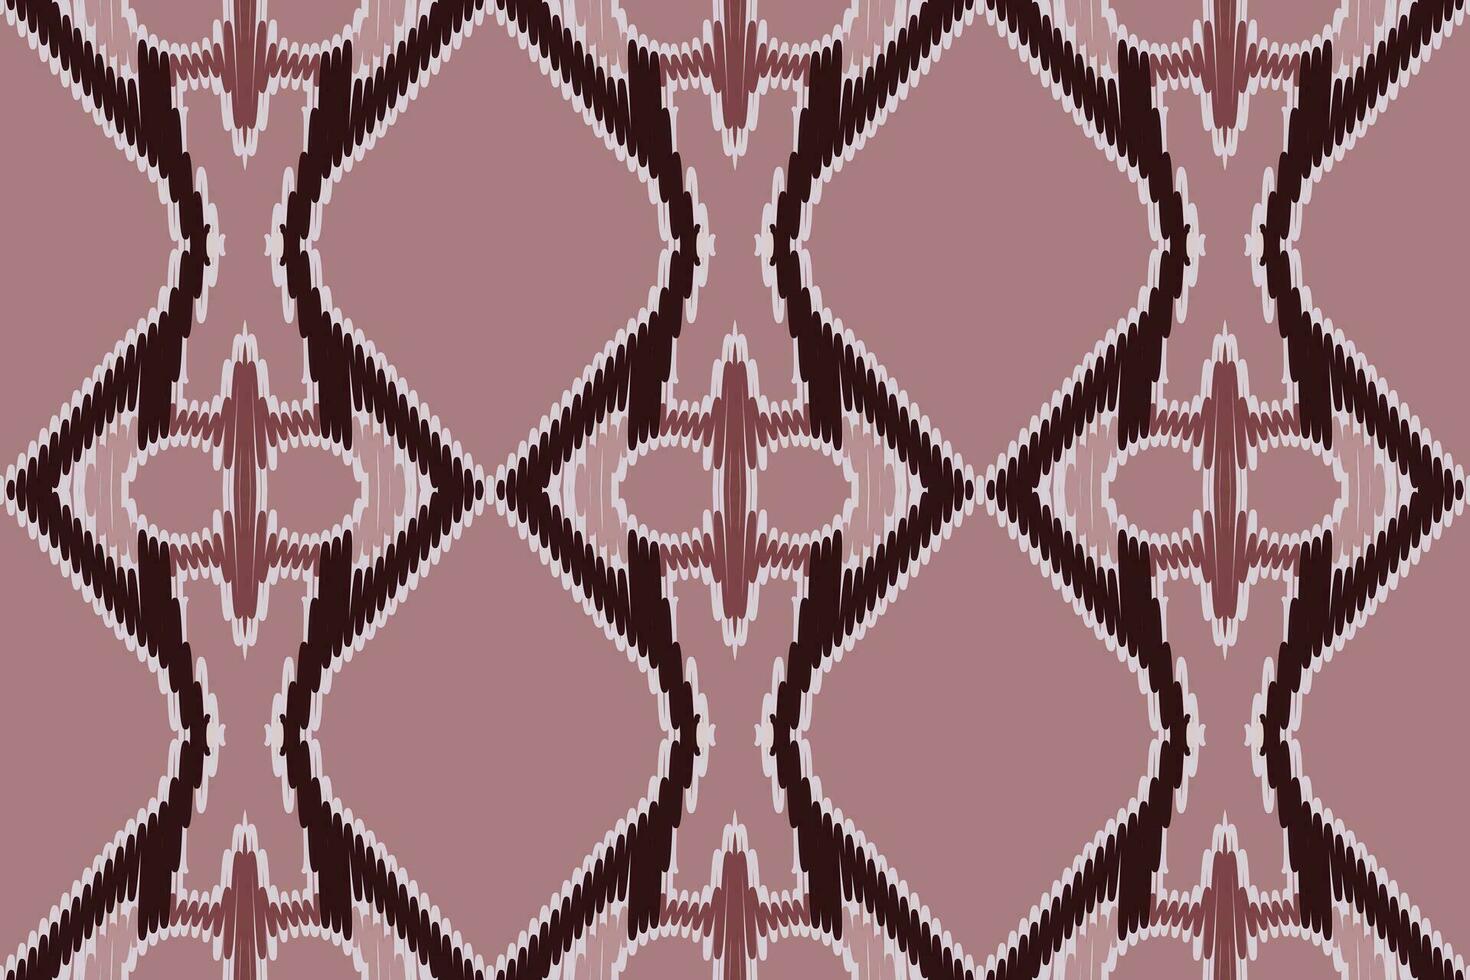 Tie dye Pattern Seamless Mughal architecture Motif embroidery, Ikat embroidery vector Design for Print pattern vintage flower folk navajo patchwork pattern